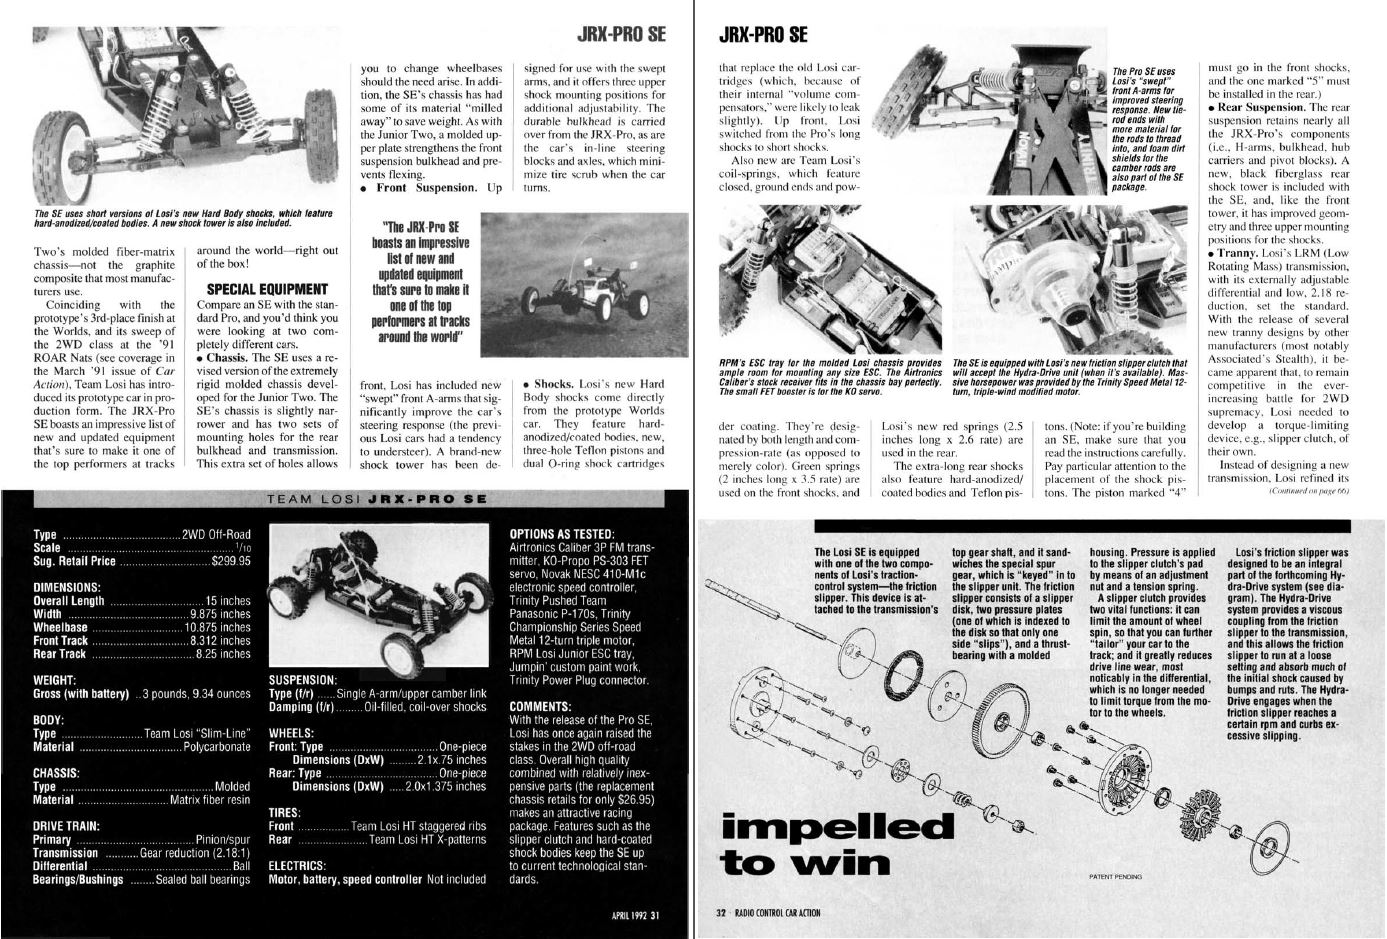 #TBT Losi JRX-Pro SE is Featured in The April 1992